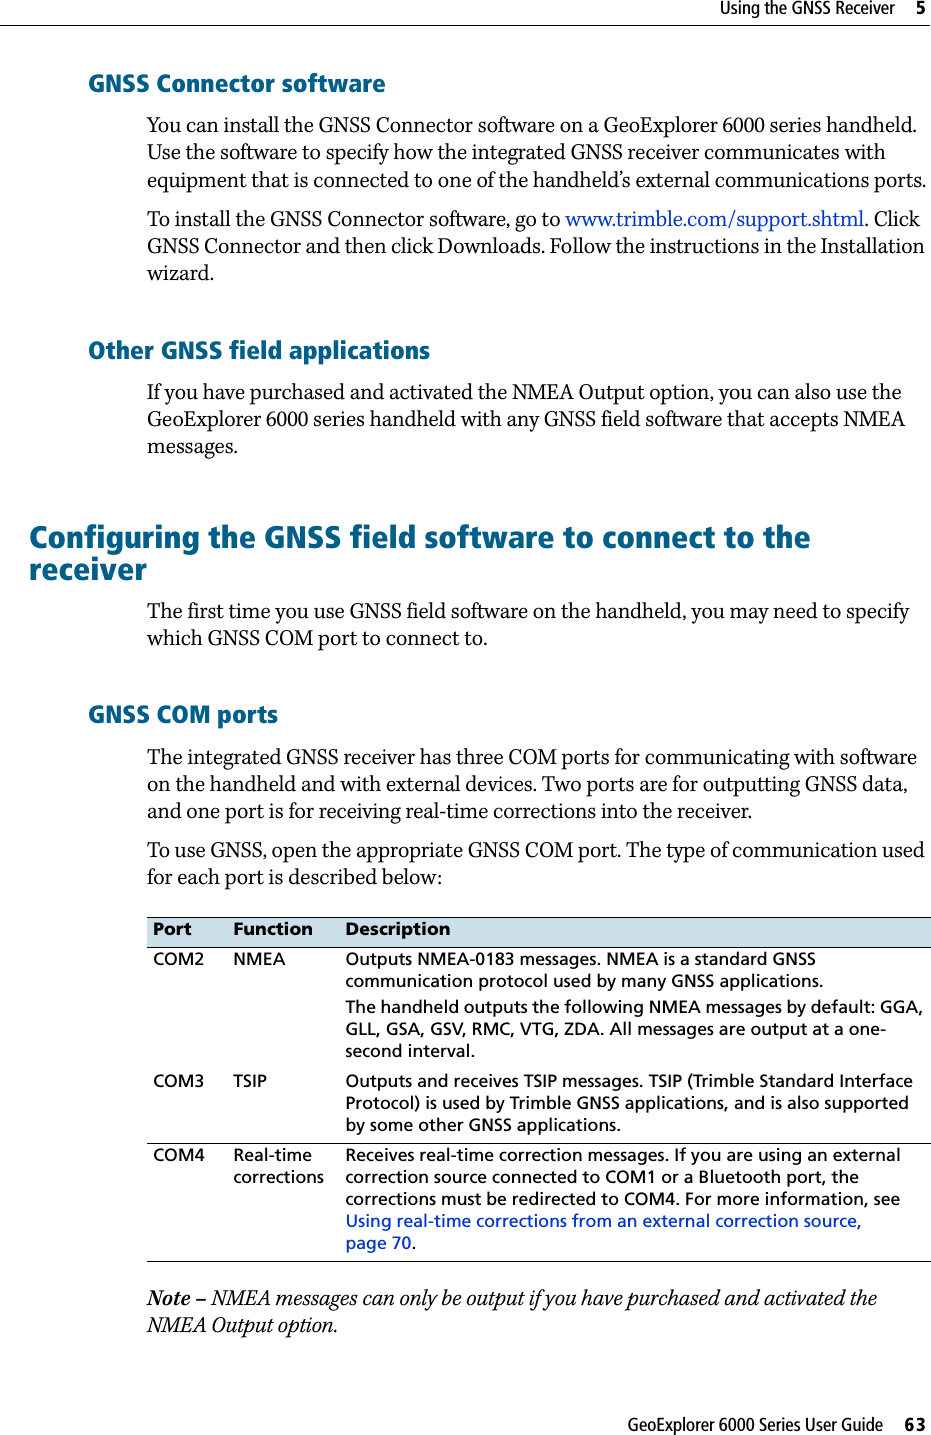 GeoExplorer 6000 Series User Guide     63Using the GNSS Receiver     5GNSS Connector softwareYou can install the GNSS Connector software on a GeoExplorer 6000 series handheld. Use the software to specify how the integrated GNSS receiver communicates with equipment that is connected to one of the handheld’s external communications ports.To install the GNSS Connector software, go to www.trimble.com/support.shtml. Click GNSS Connector and then click Downloads. Follow the instructions in the Installation wizard.Other GNSS field applicationsIf you have purchased and activated the NMEA Output option, you can also use the GeoExplorer 6000 series handheld with any GNSS field software that accepts NMEA messages.Configuring the GNSS field software to connect to the receiverThe first time you use GNSS field software on the handheld, you may need to specify which GNSS COM port to connect to.GNSS COM ports The integrated GNSS receiver has three COM ports for communicating with software on the handheld and with external devices. Two ports are for outputting GNSS data, and one port is for receiving real-time corrections into the receiver.To use GNSS, open the appropriate GNSS COM port. The type of communication used for each port is described below:  Note – NMEA messages can only be output if you have purchased and activated the NMEA Output option.Port Function DescriptionCOM2 NMEA Outputs NMEA-0183 messages. NMEA is a standard GNSS communication protocol used by many GNSS applications.The handheld outputs the following NMEA messages by default: GGA, GLL, GSA, GSV, RMC, VTG, ZDA. All messages are output at a one-second interval.COM3 TSIP Outputs and receives TSIP messages. TSIP (Trimble Standard Interface Protocol) is used by Trimble GNSS applications, and is also supported by some other GNSS applications.COM4 Real-time correctionsReceives real-time correction messages. If you are using an external correction source connected to COM1 or a Bluetooth port, the corrections must be redirected to COM4. For more information, see Using real-time corrections from an external correction source, page 70.